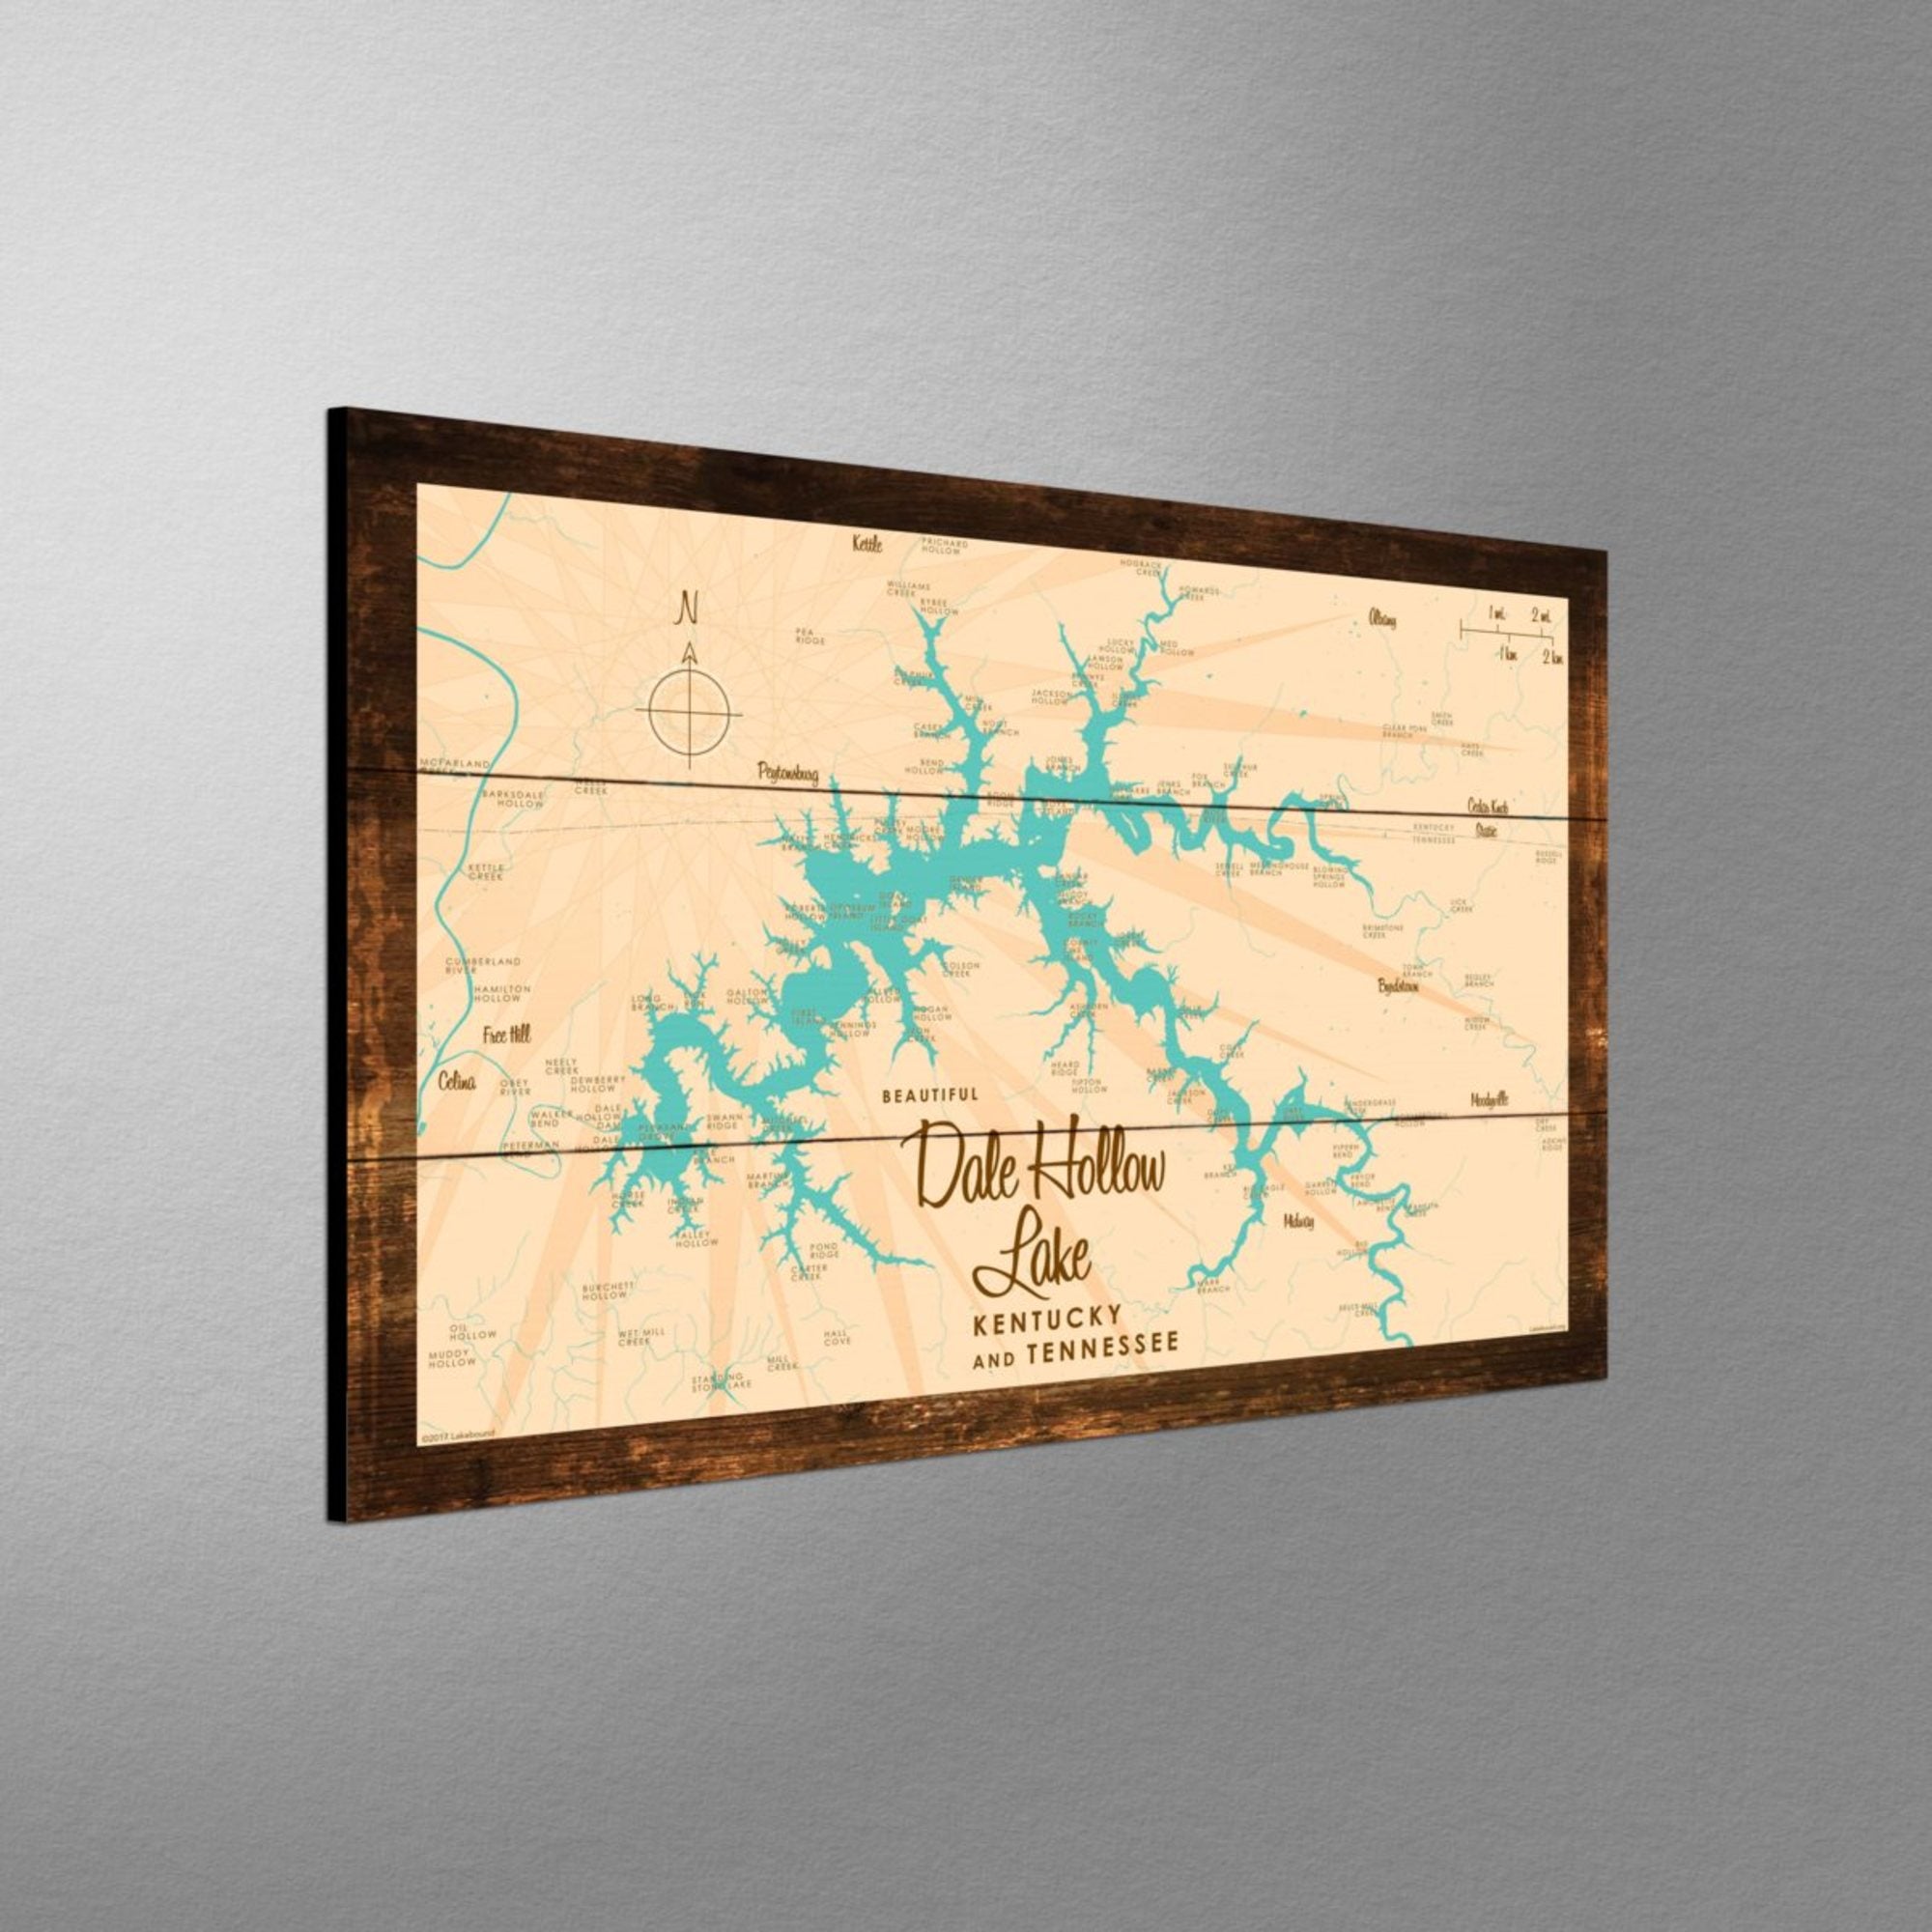 Dale Hollow Lake, Kentucky & Tennessee, Rustic Wood Sign Map Art